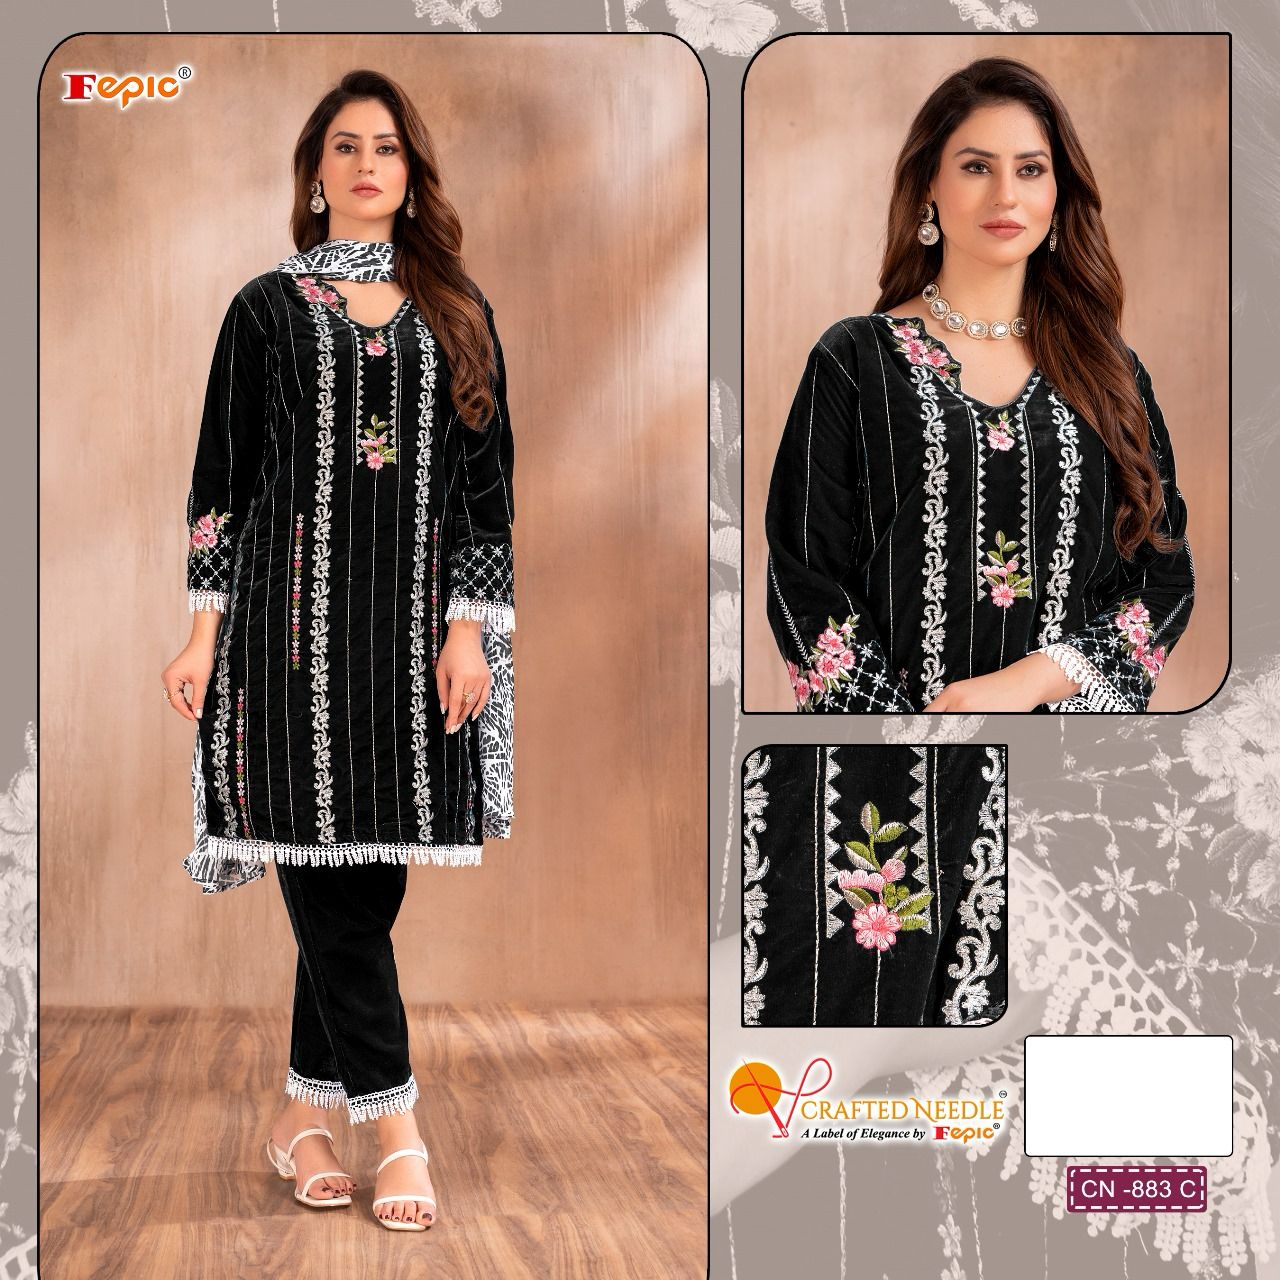 FEPIC CN 883 C CRAFTED NEEDLE READYMADE SALWAR SUITS